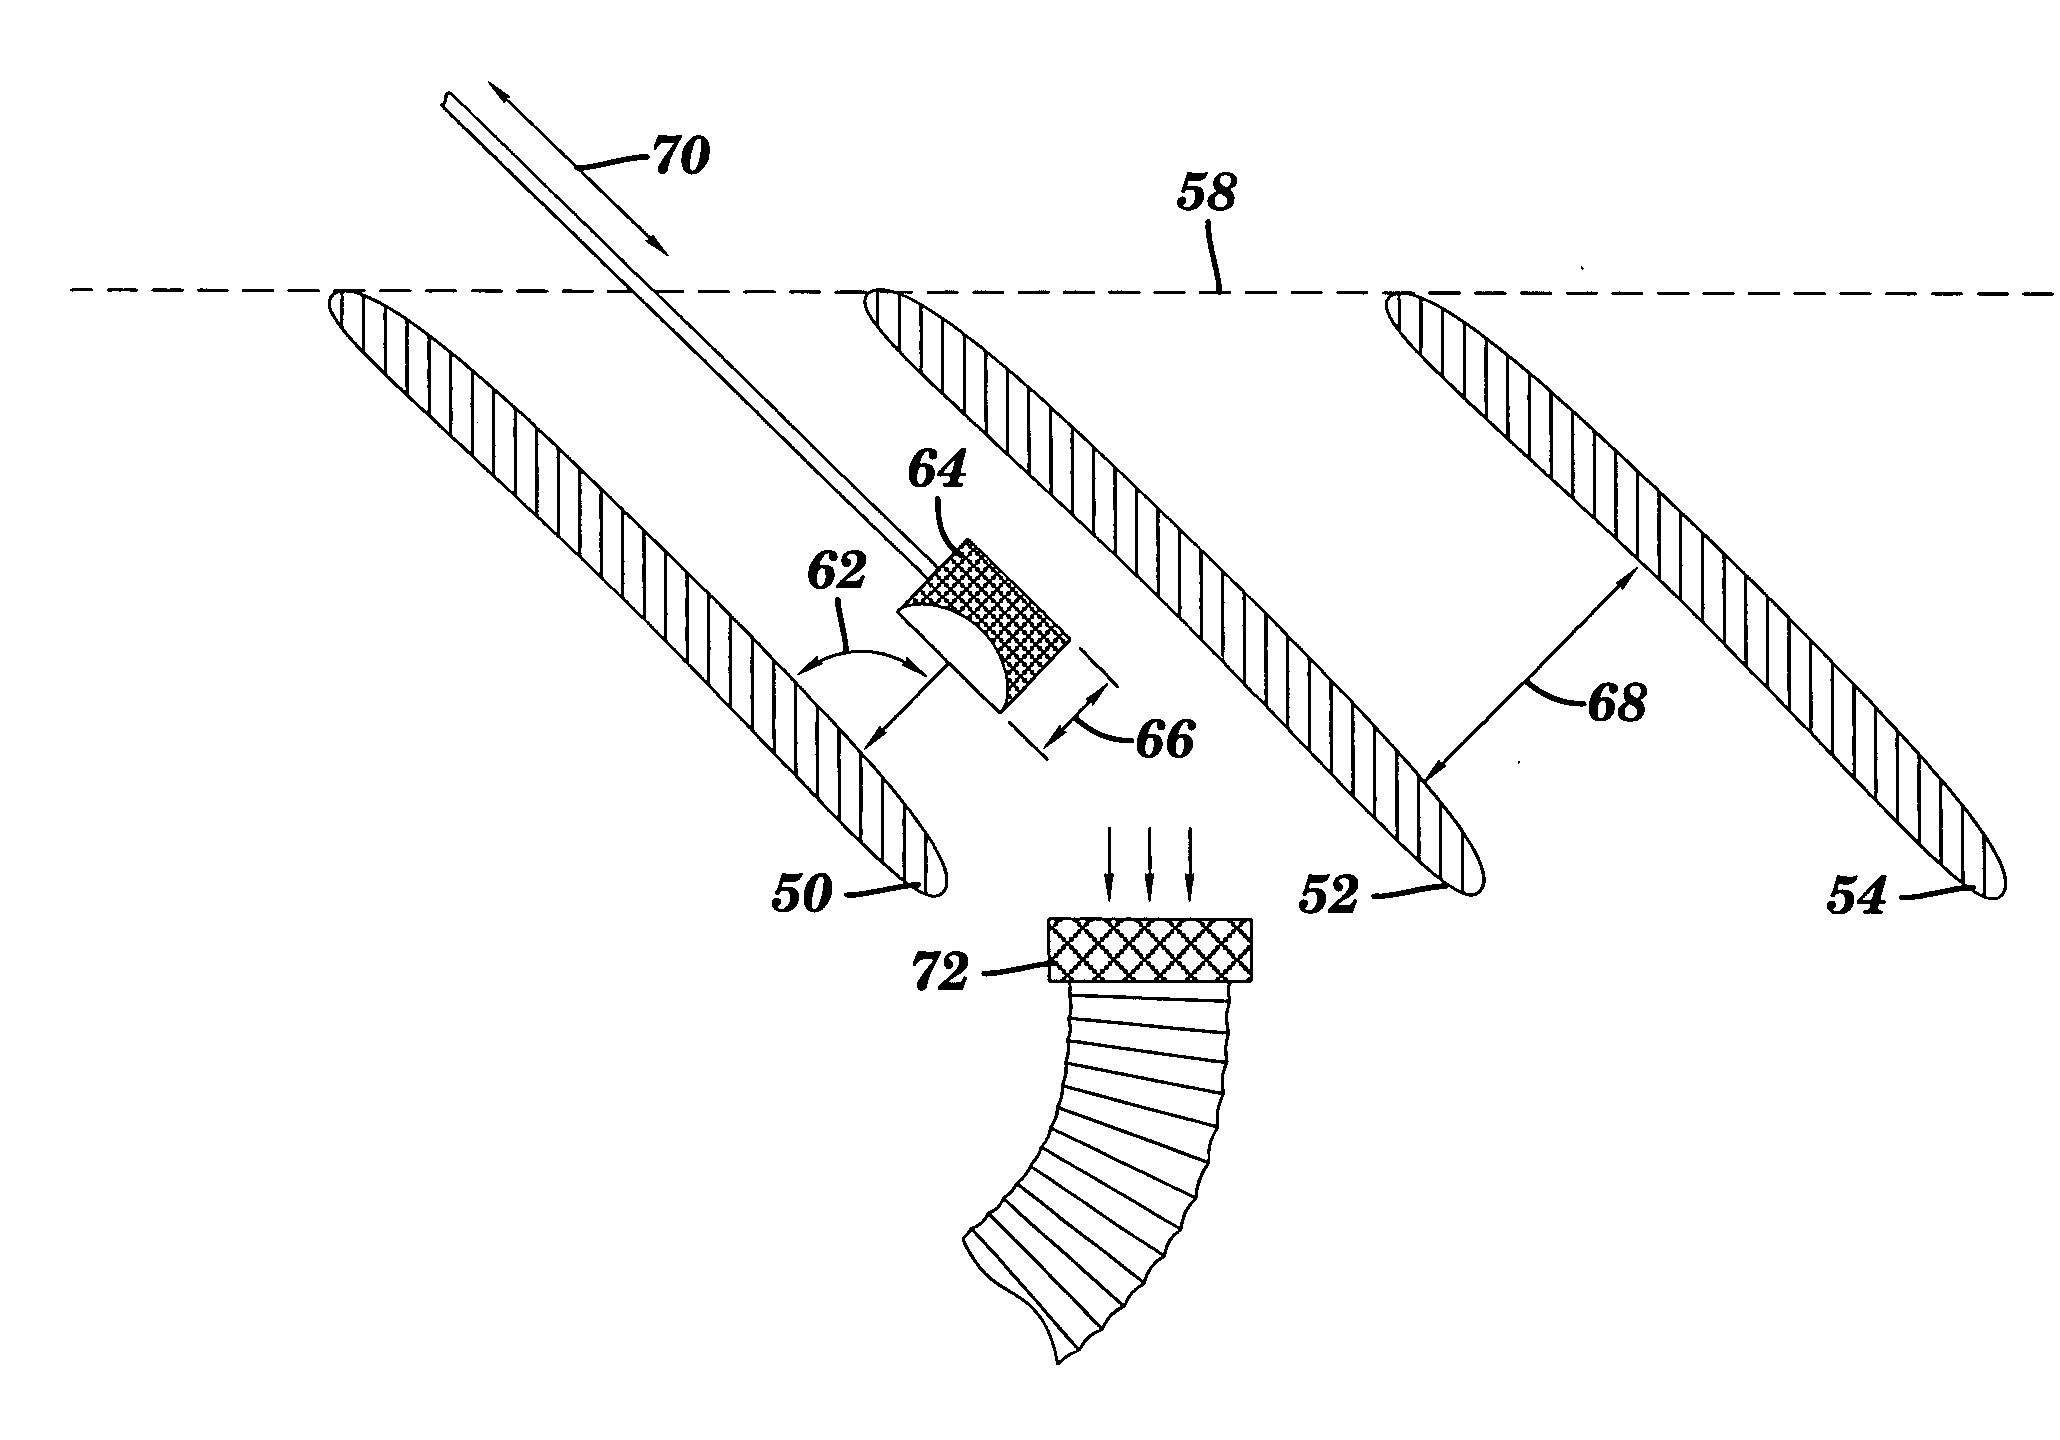 Method and apparatus for removing a thermal barrier coating from a power generation component